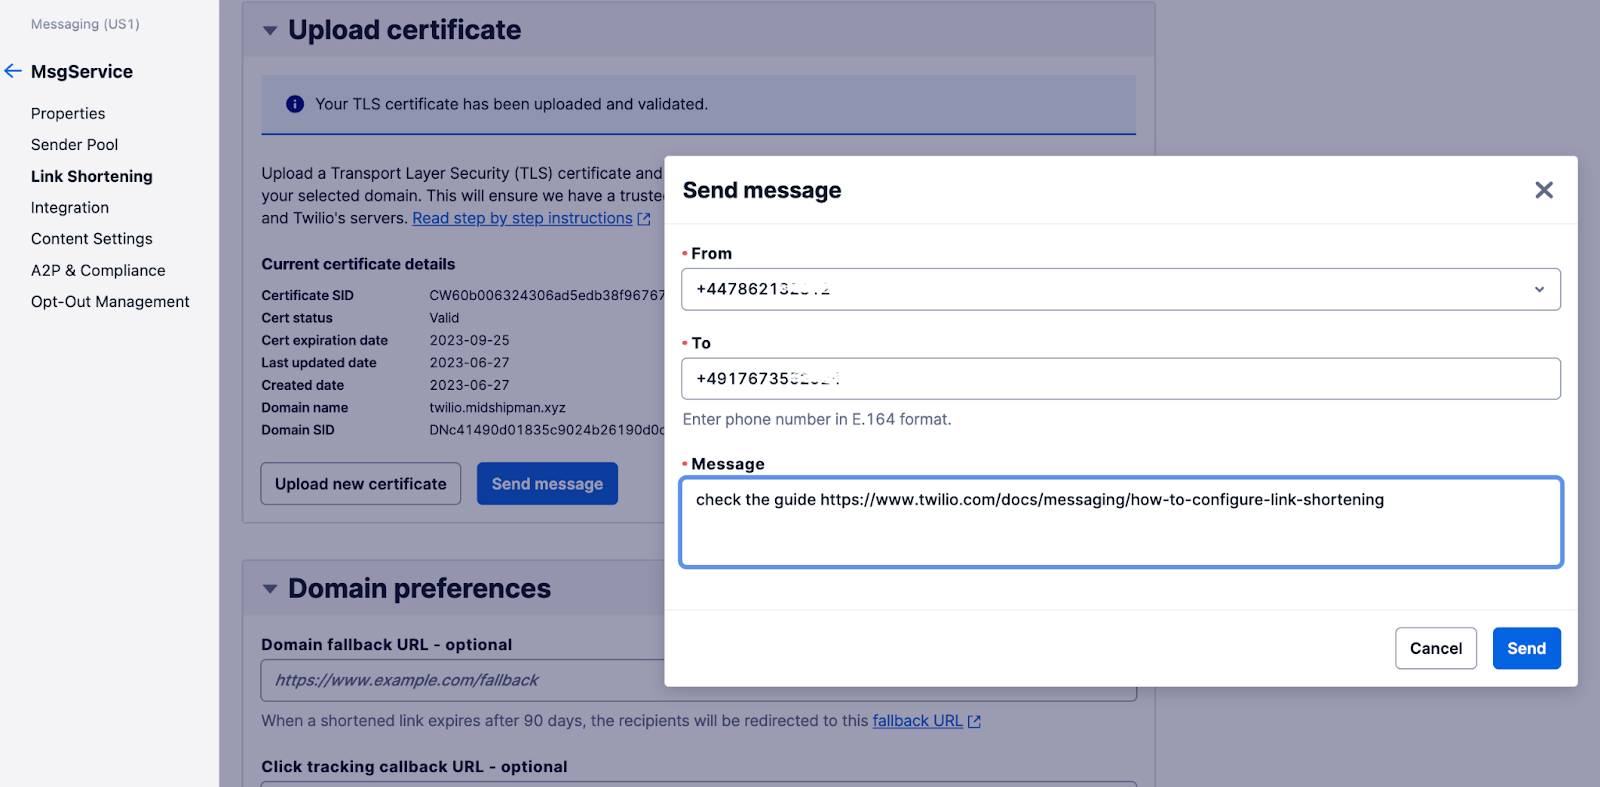 Send a test SMS from the Twilio Console